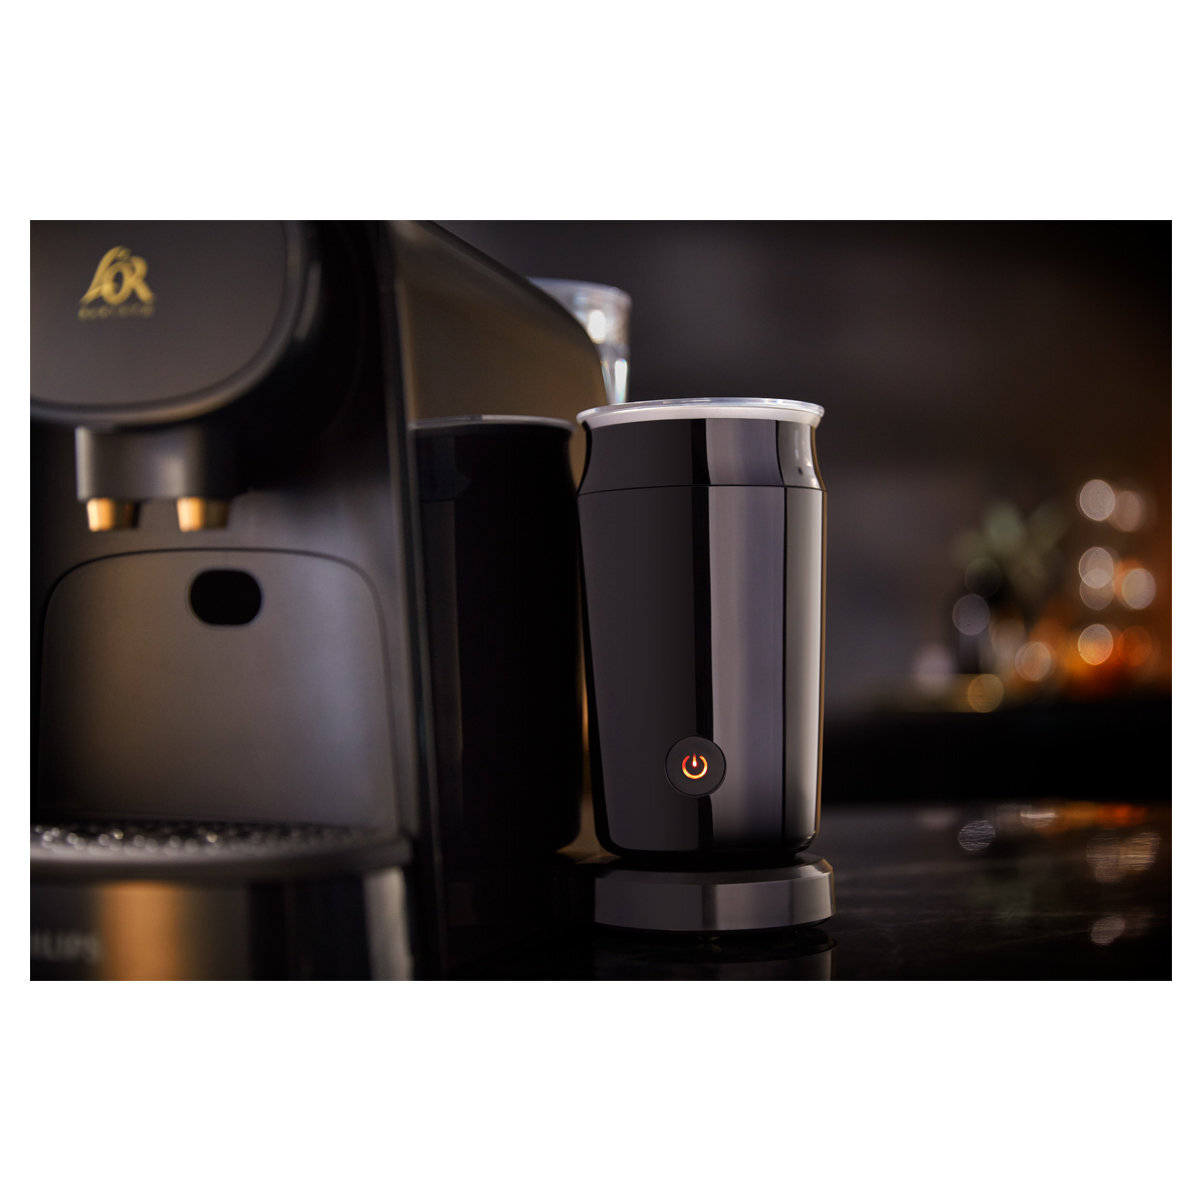 Philips L'Or Barista Capsule Machine with Milk Frother LM8014/60/A Review, Home espresso coffee machine